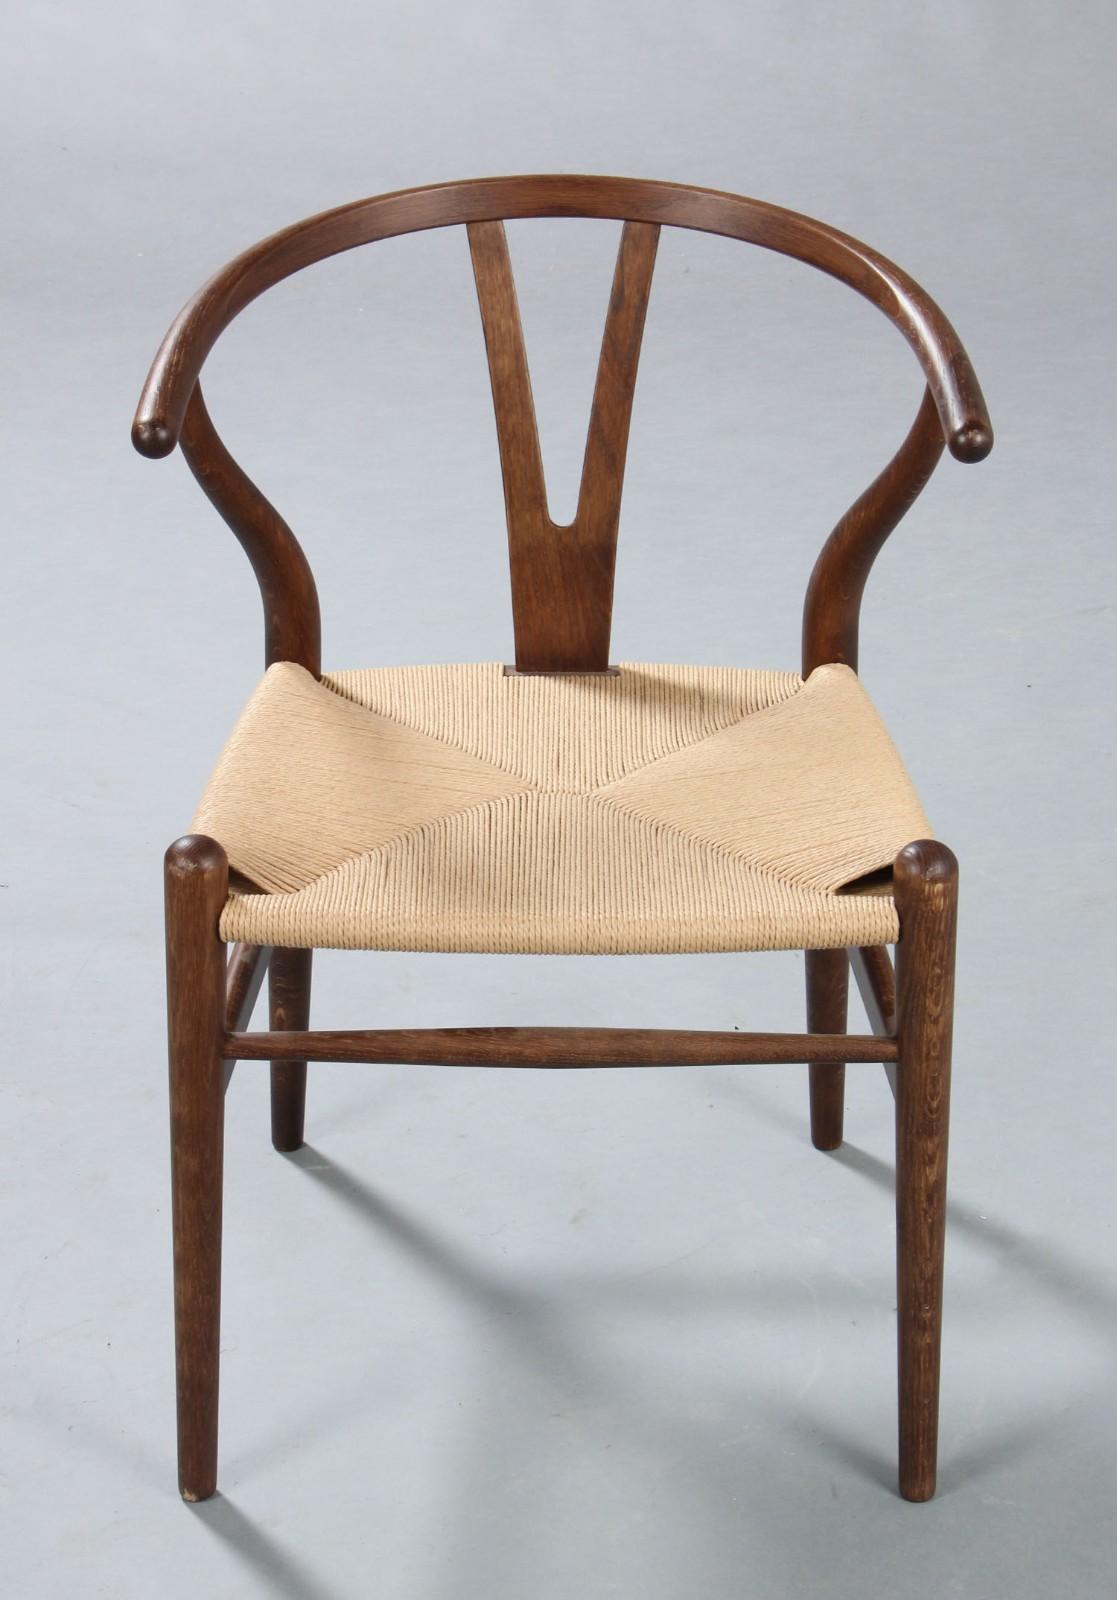 Hans J Wegner (1914-2007). Bog oak Y-chair, model CH 24, seat woven with paper yarn, manufactured by Carl Hansen & Søn. H. 76 cm. Seat height 45 cm. Some markings.